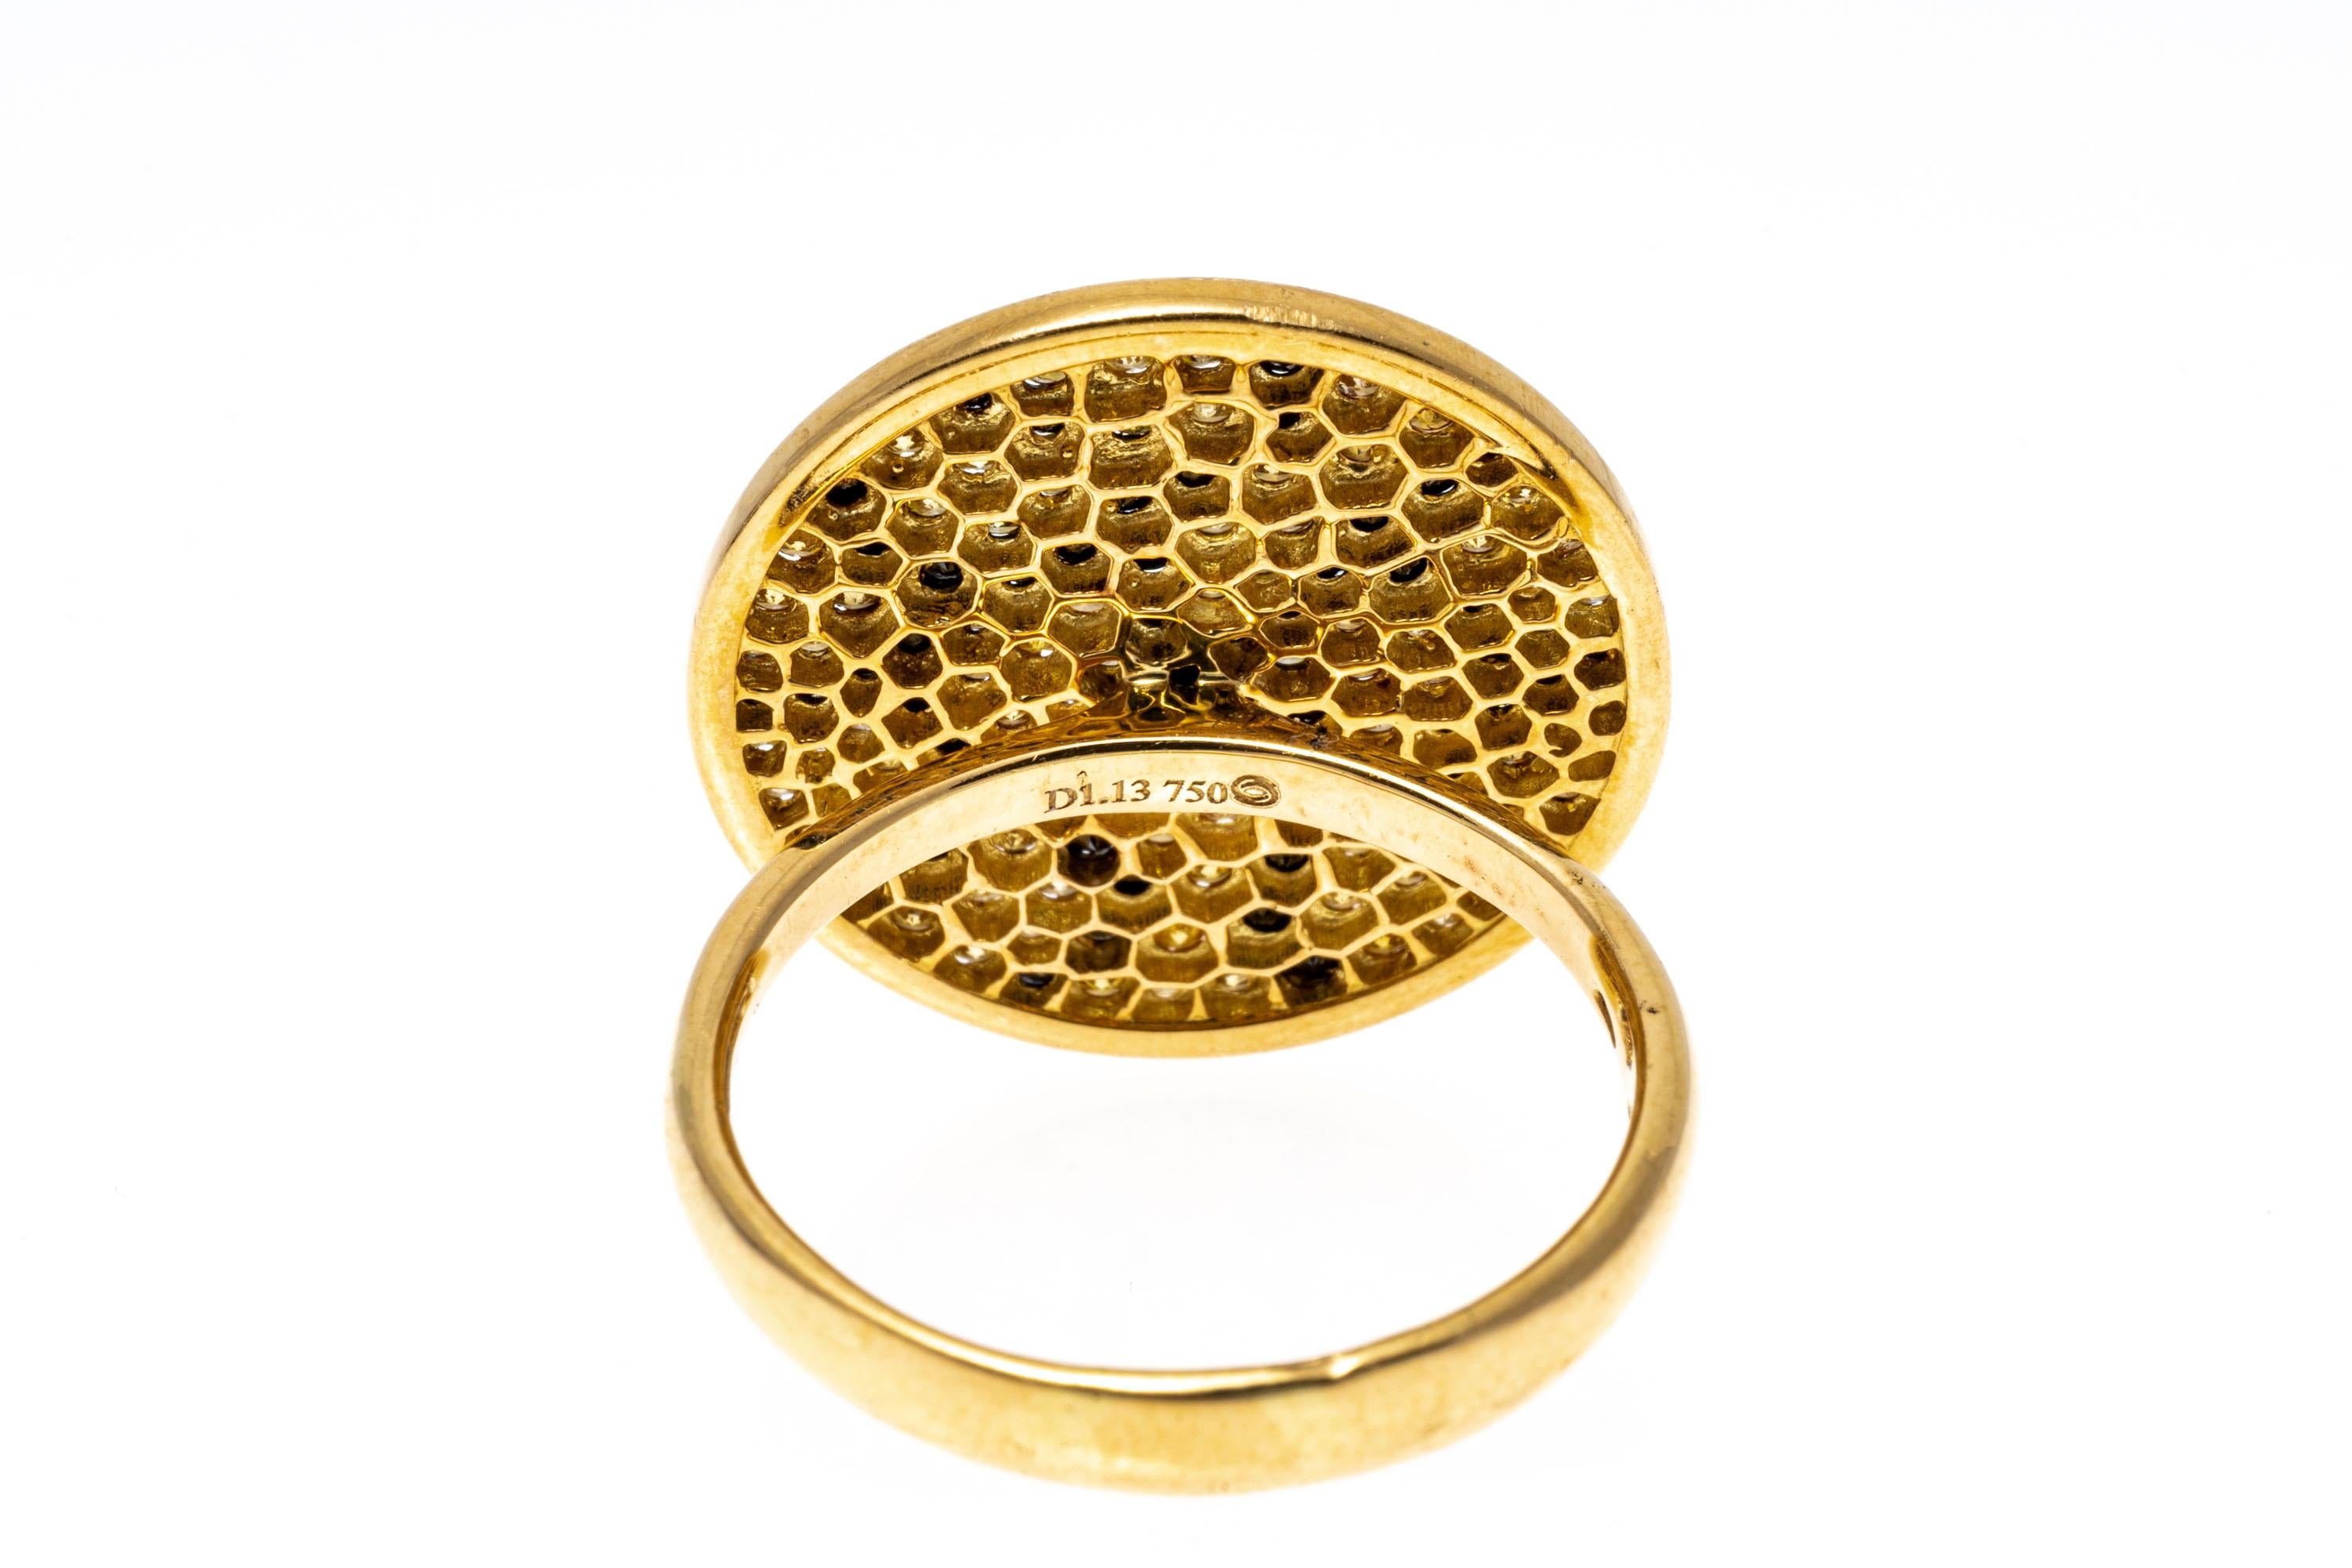 18k Yellow Gold Impactful Leopard Print Pave Diamond Ring, 1.13 TCW For Sale 2